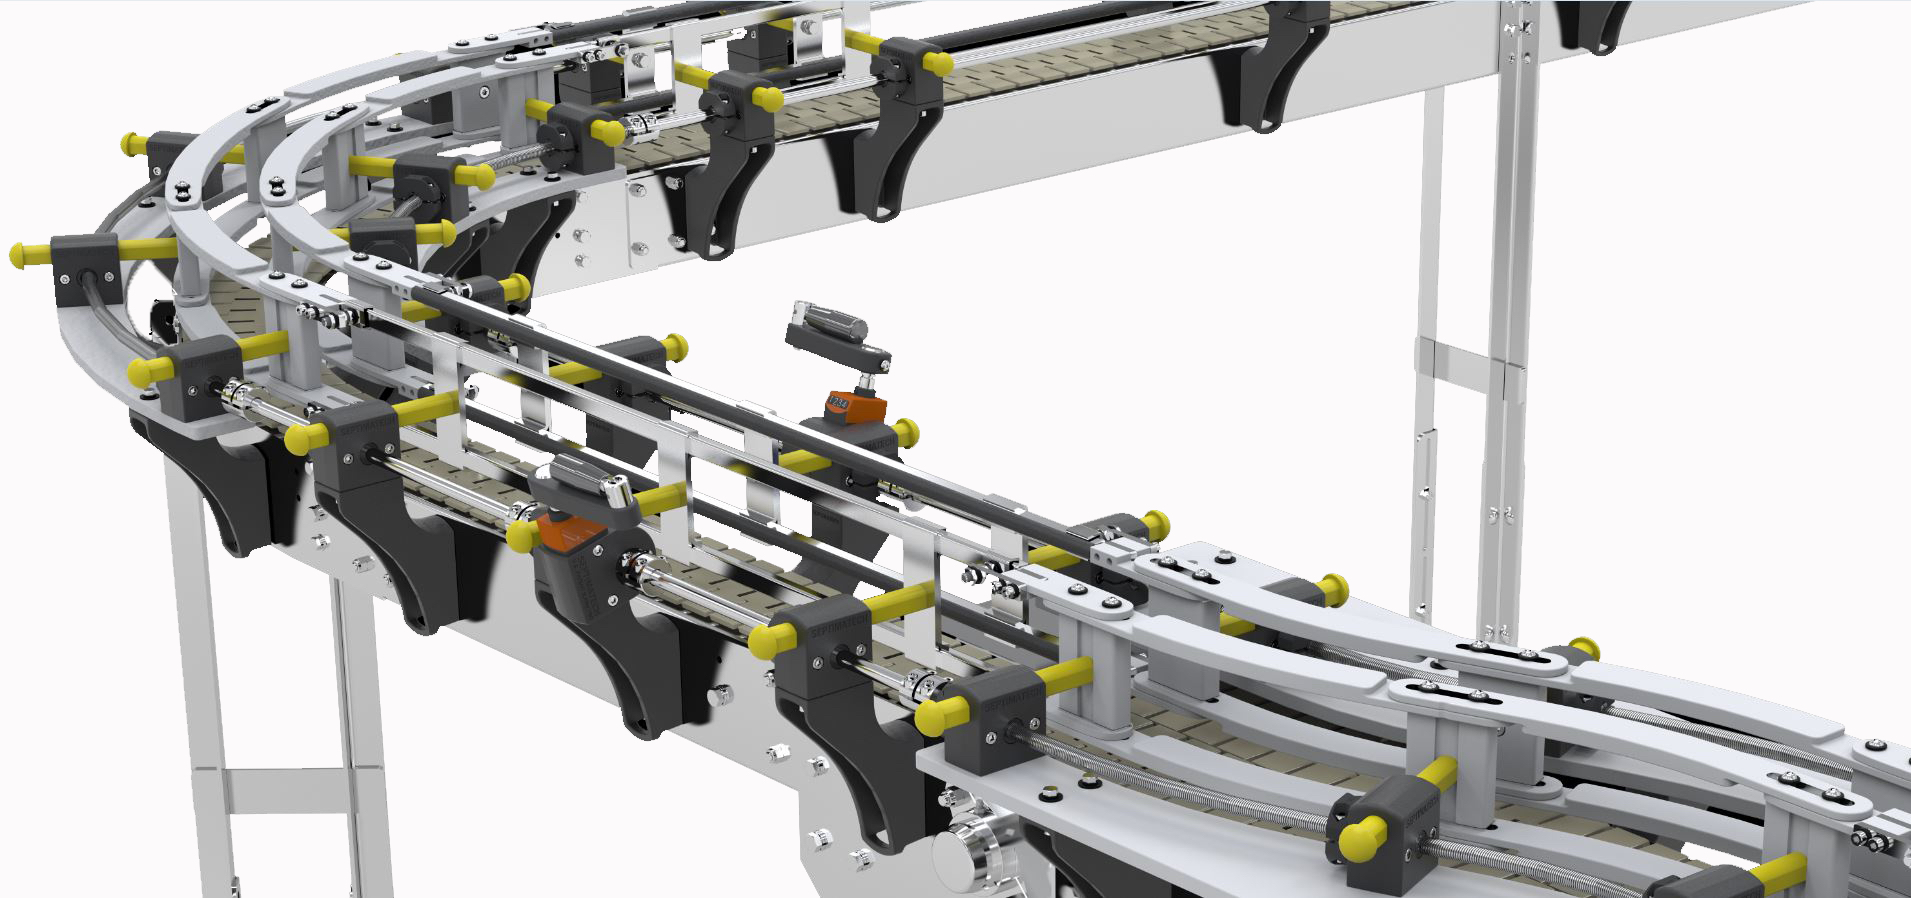 Easy Adjust Rails® system delivers fast, repeatable guide rail adjustment and changeover, without pneumatics or other high maintenance components.